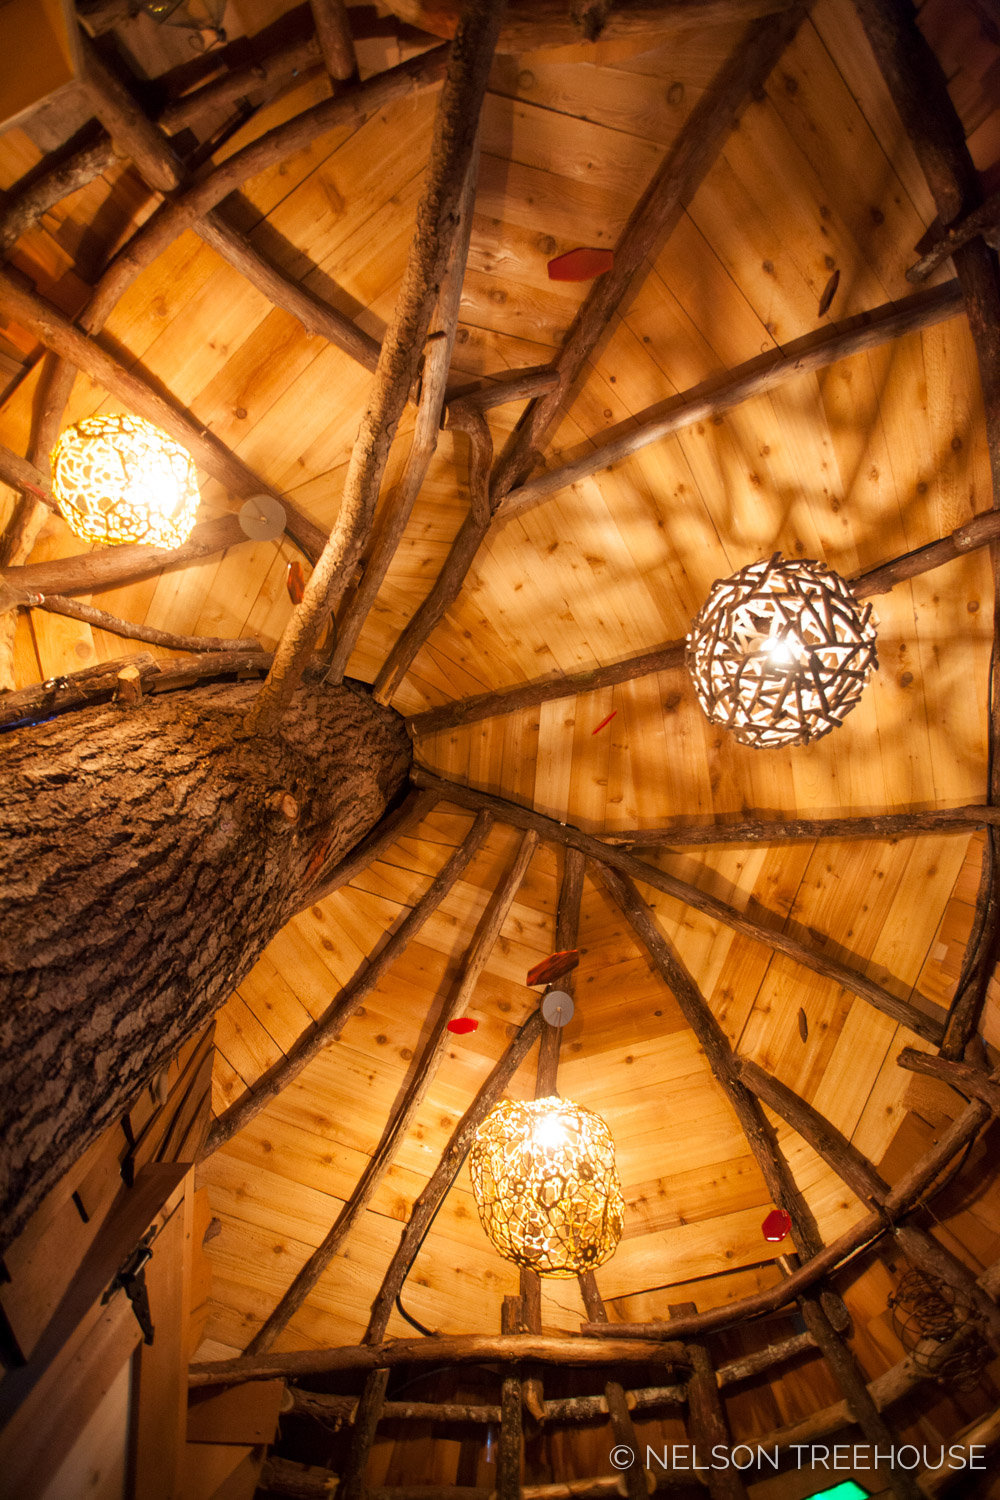  Ceiling of the beehive treehouse 